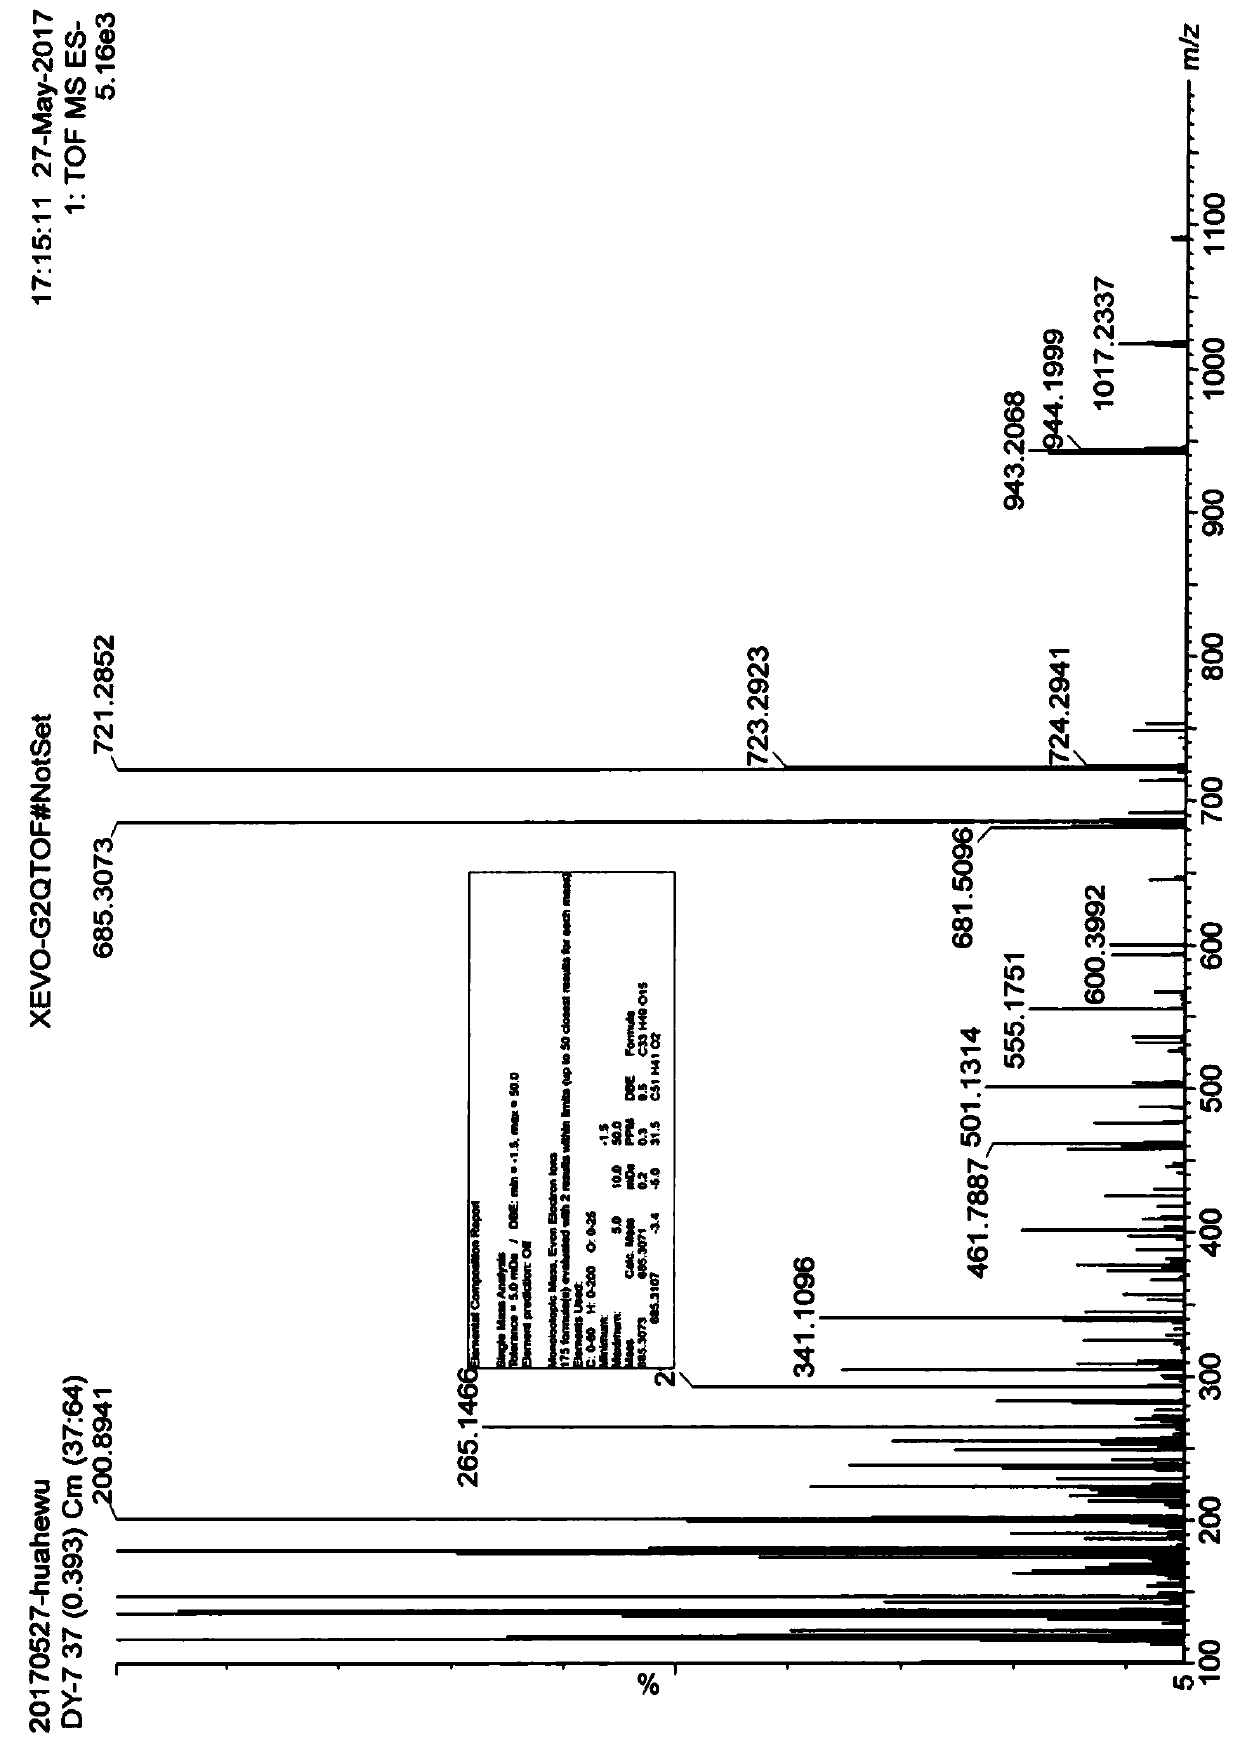 Diterpenoid glycoside compound in glechoma longituba and extraction and separation method thereof